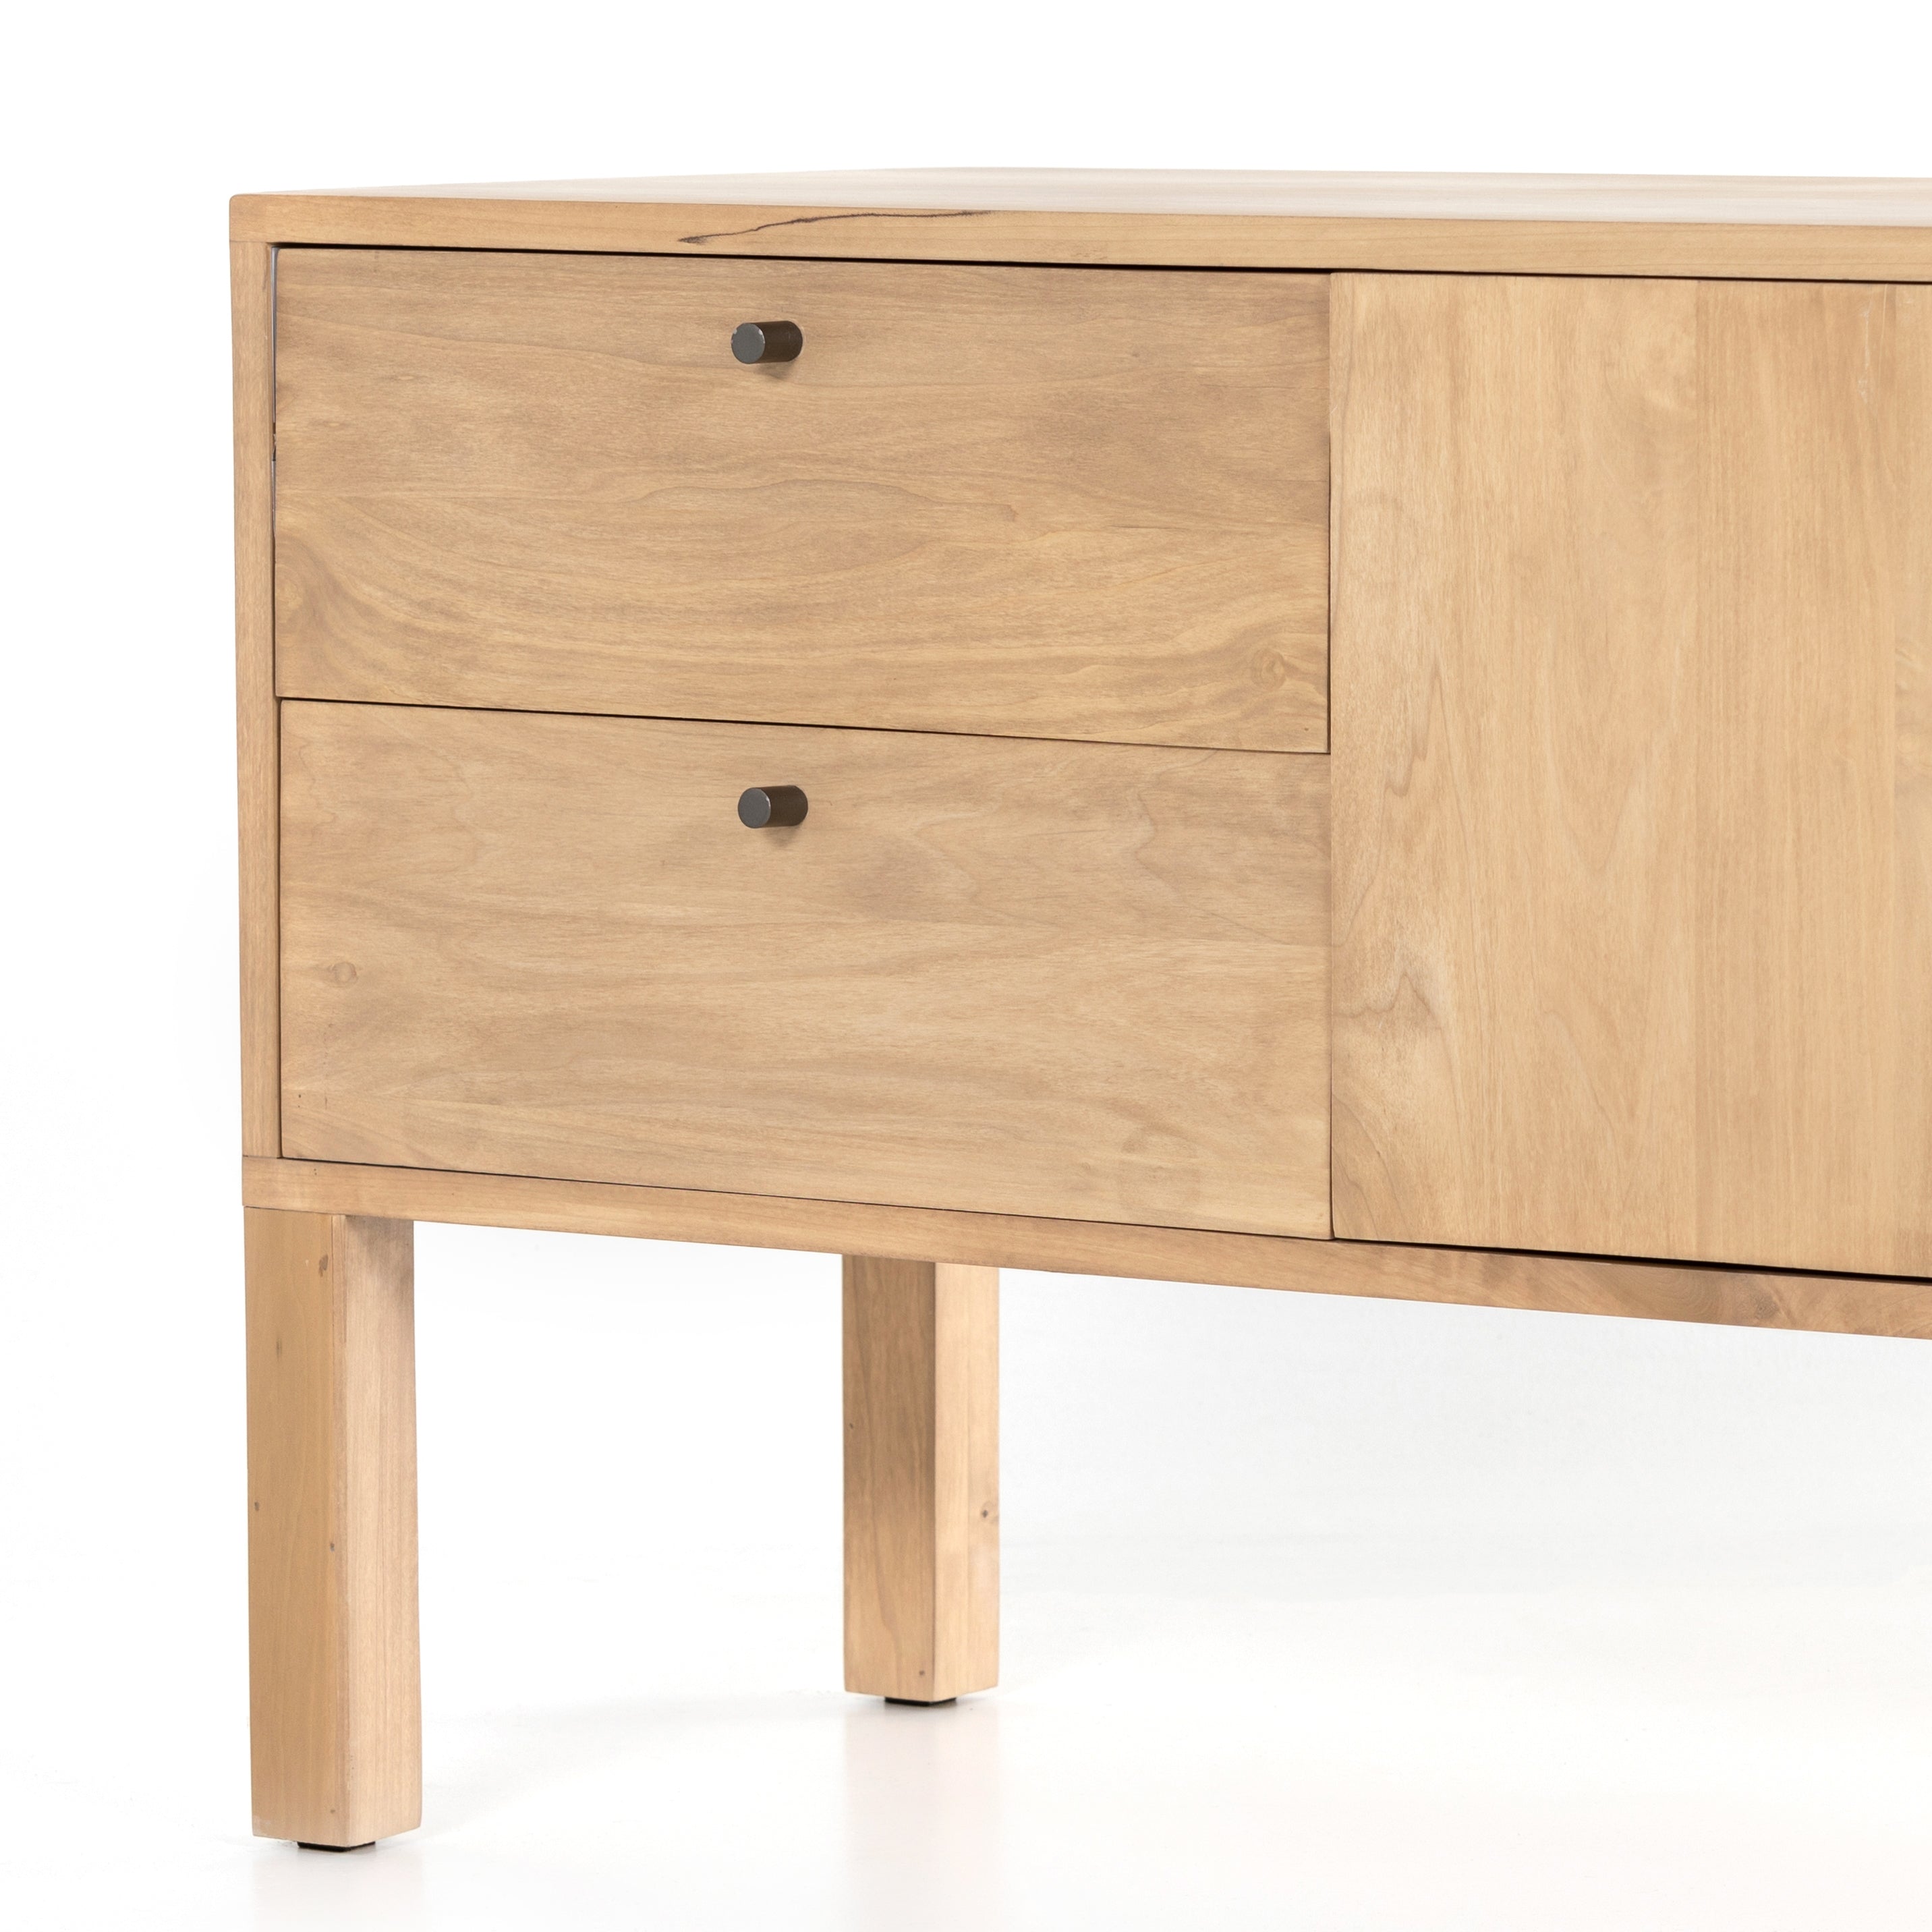 This Isador Nightstand - Dry Wash Poplar is clean, bright and dreamy. Solid dry-washed poplar forms a clean-lined media console with dovetail joinery plus iron and leather hardware, for a fresh look to any living room.  Ample shelving + rear cut outs for cord management brings this to the next level!  Overall Dimensions: 80.00"w x 19.00"d x 26.00"h